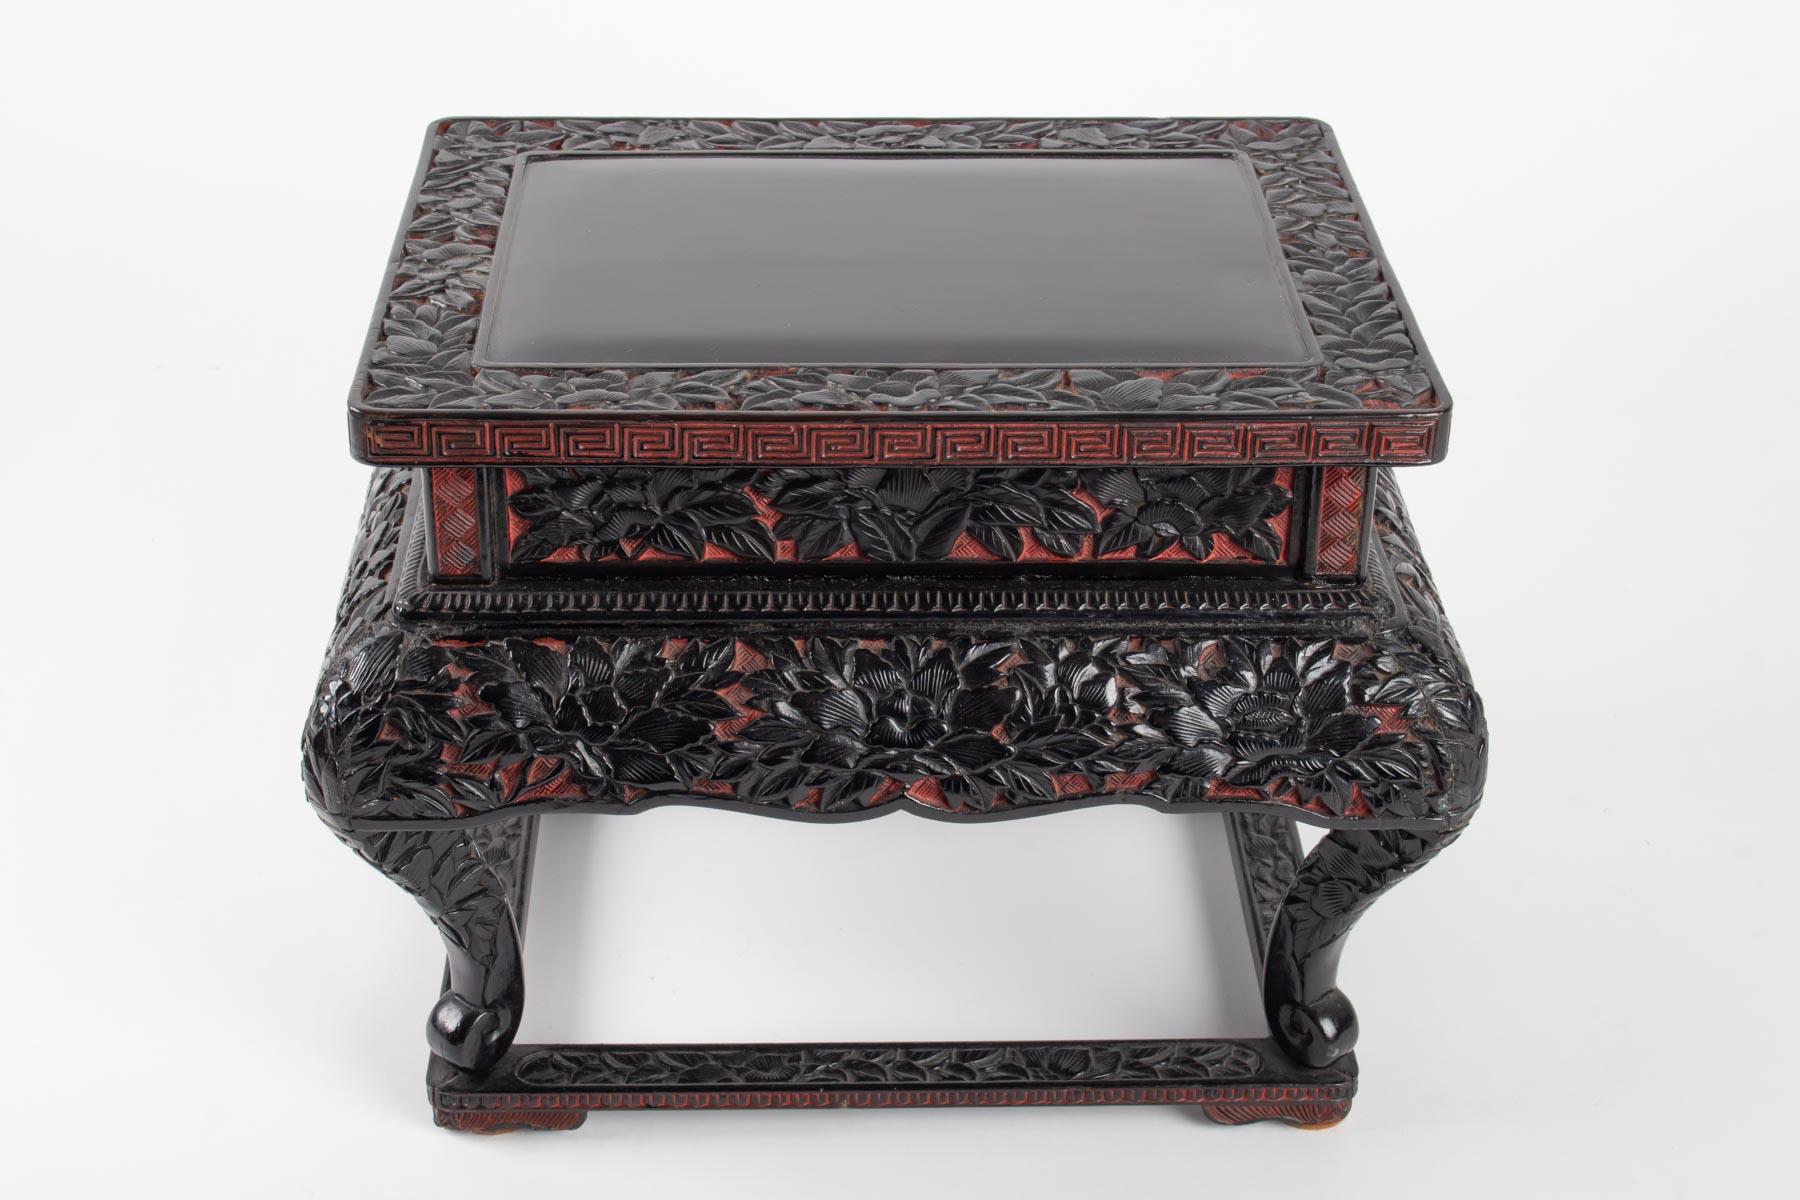 Small table lacquer bicolor chiselled decor peonies, China, 19th century, perfect condition of conservation.
Measures: H 23cm, W 31cm, W 23cm.